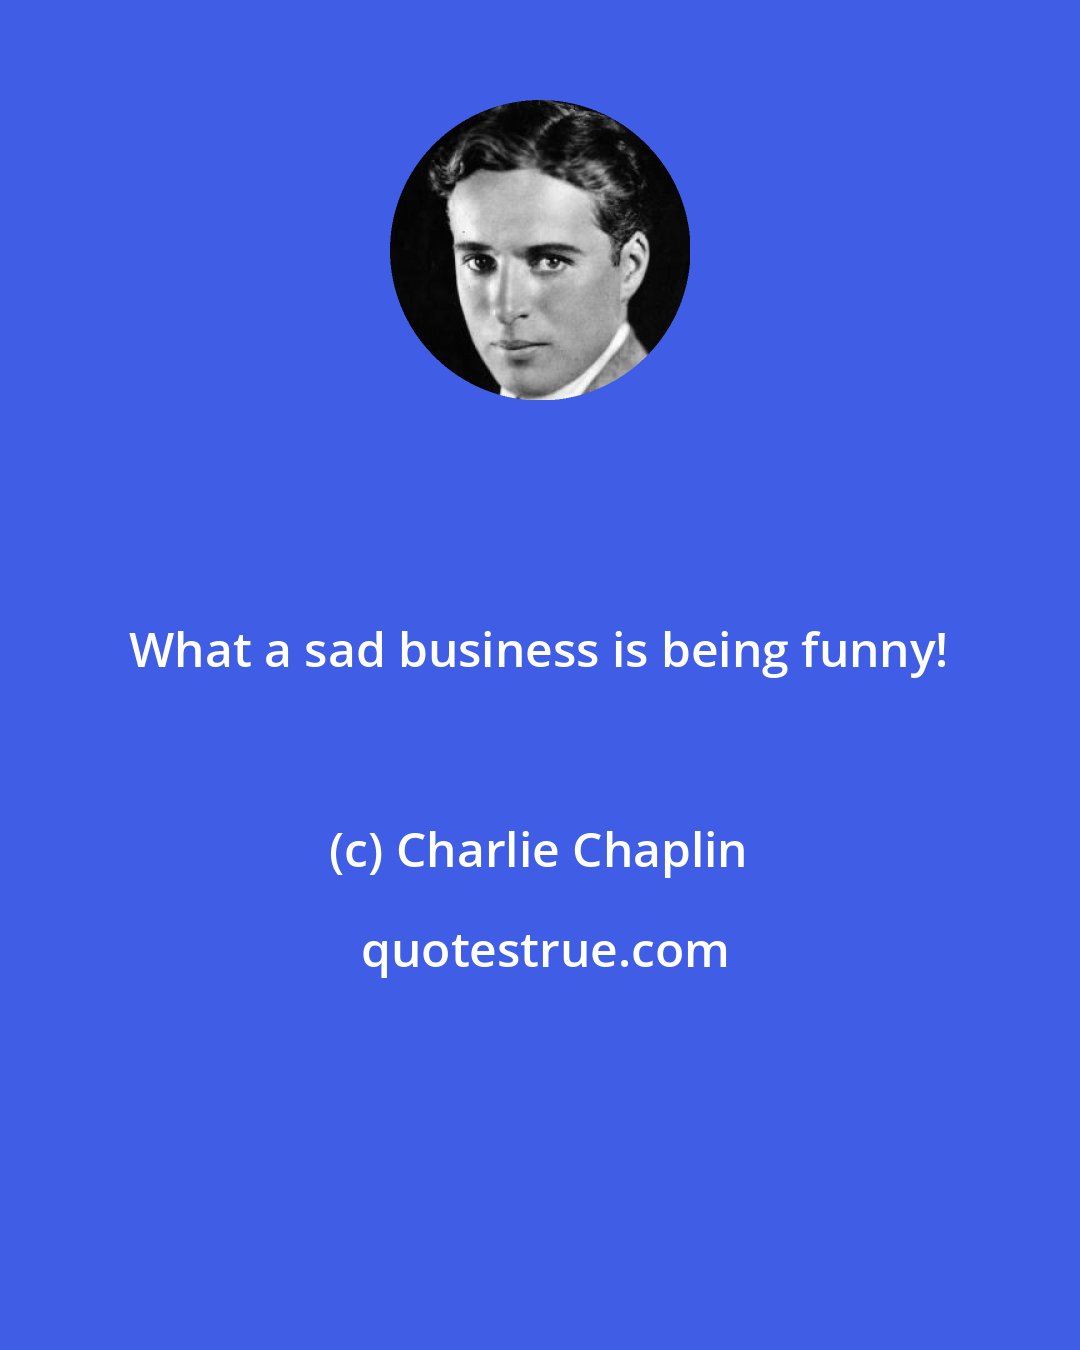 Charlie Chaplin: What a sad business is being funny!